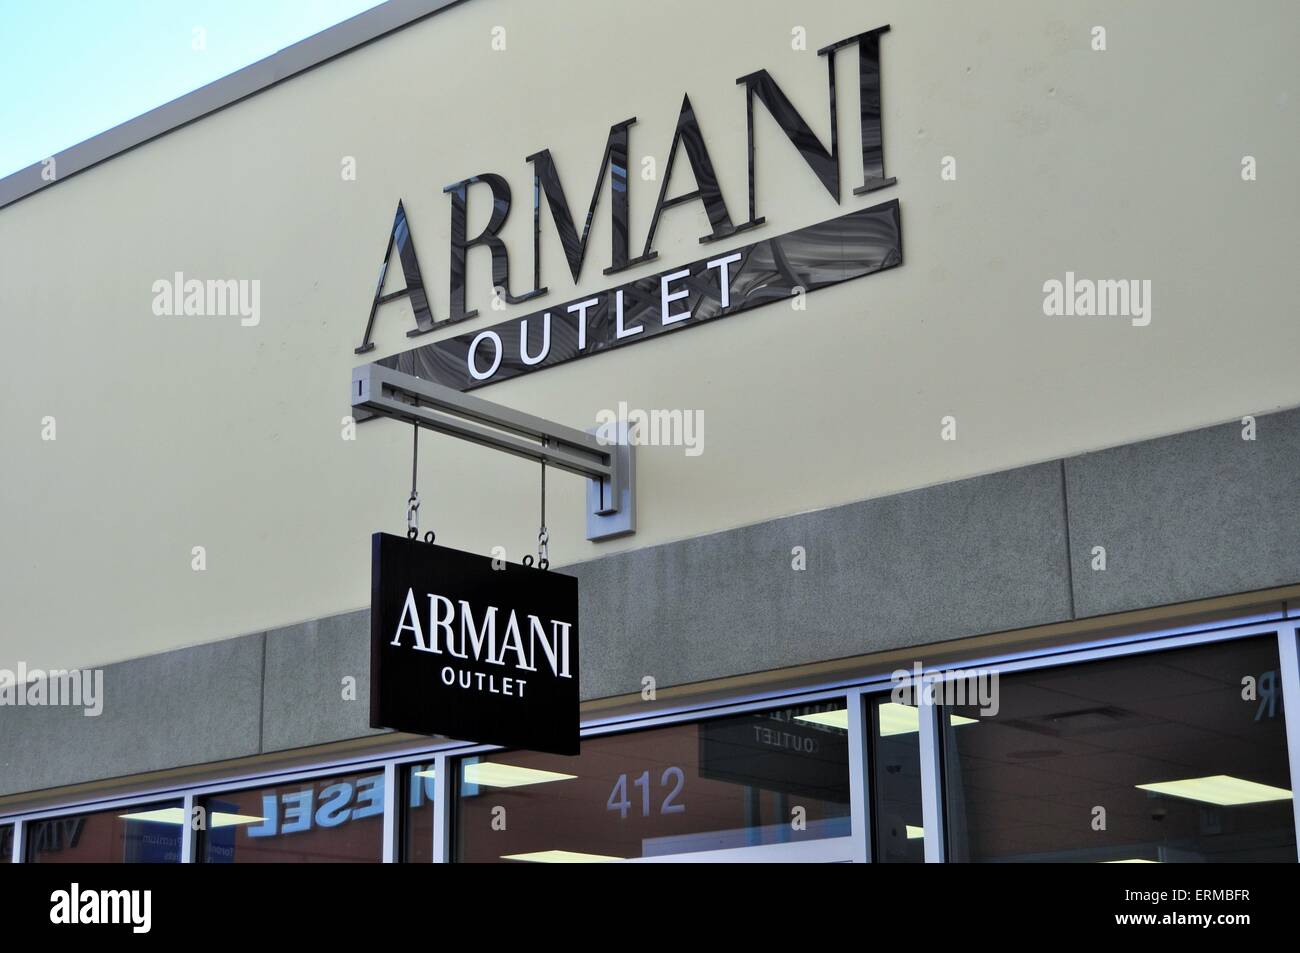 Armani outlet store front Stock Photo - Alamy